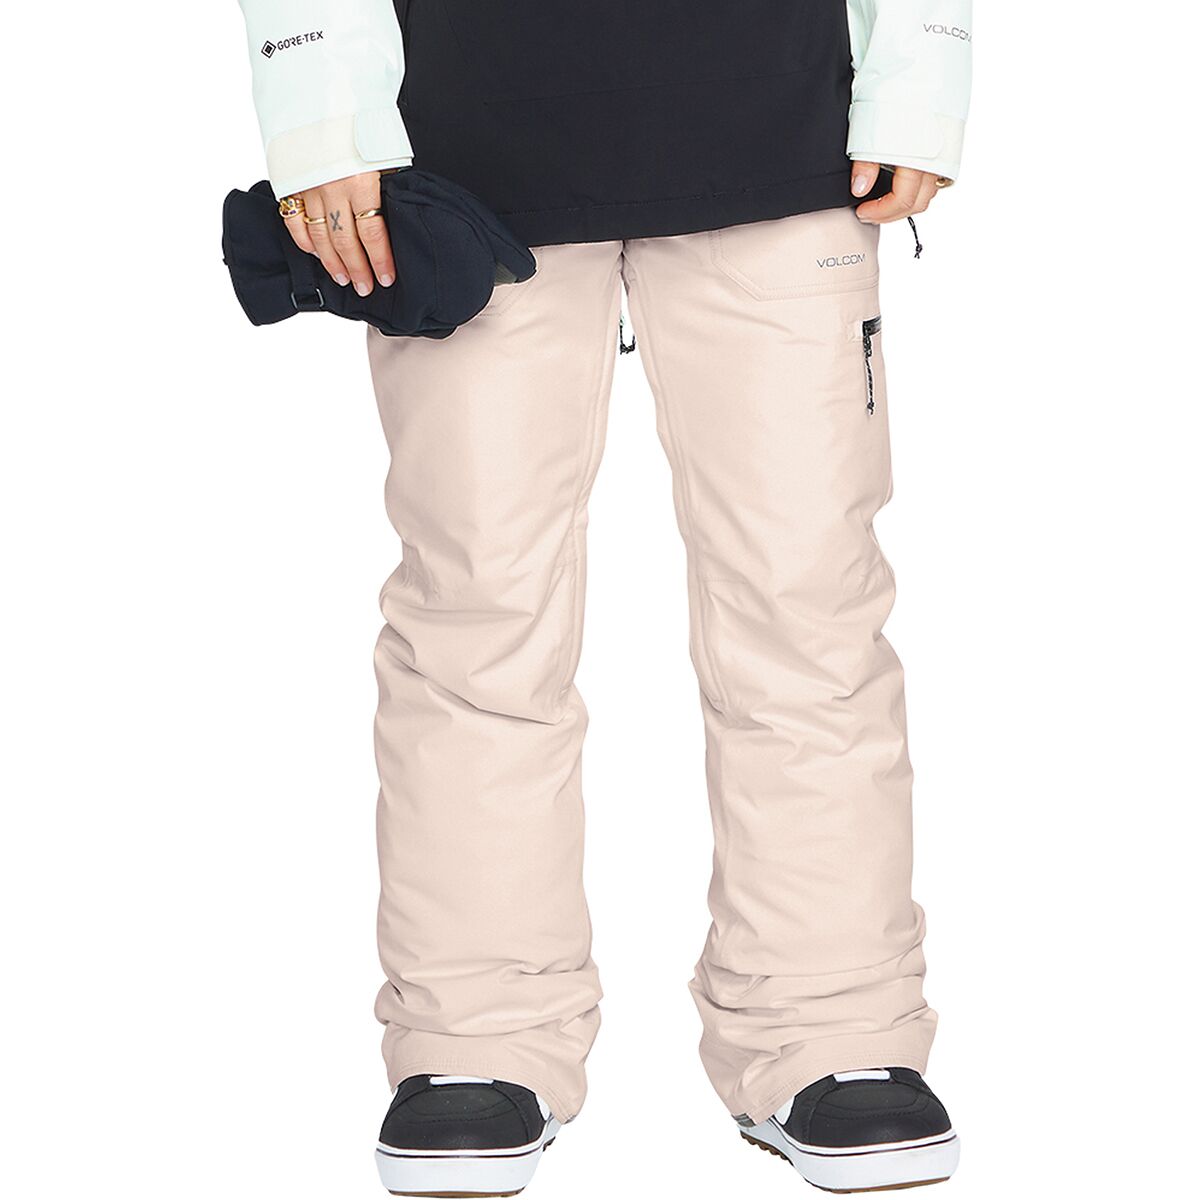 Knox Insulated GORE-TEX Pant - Women